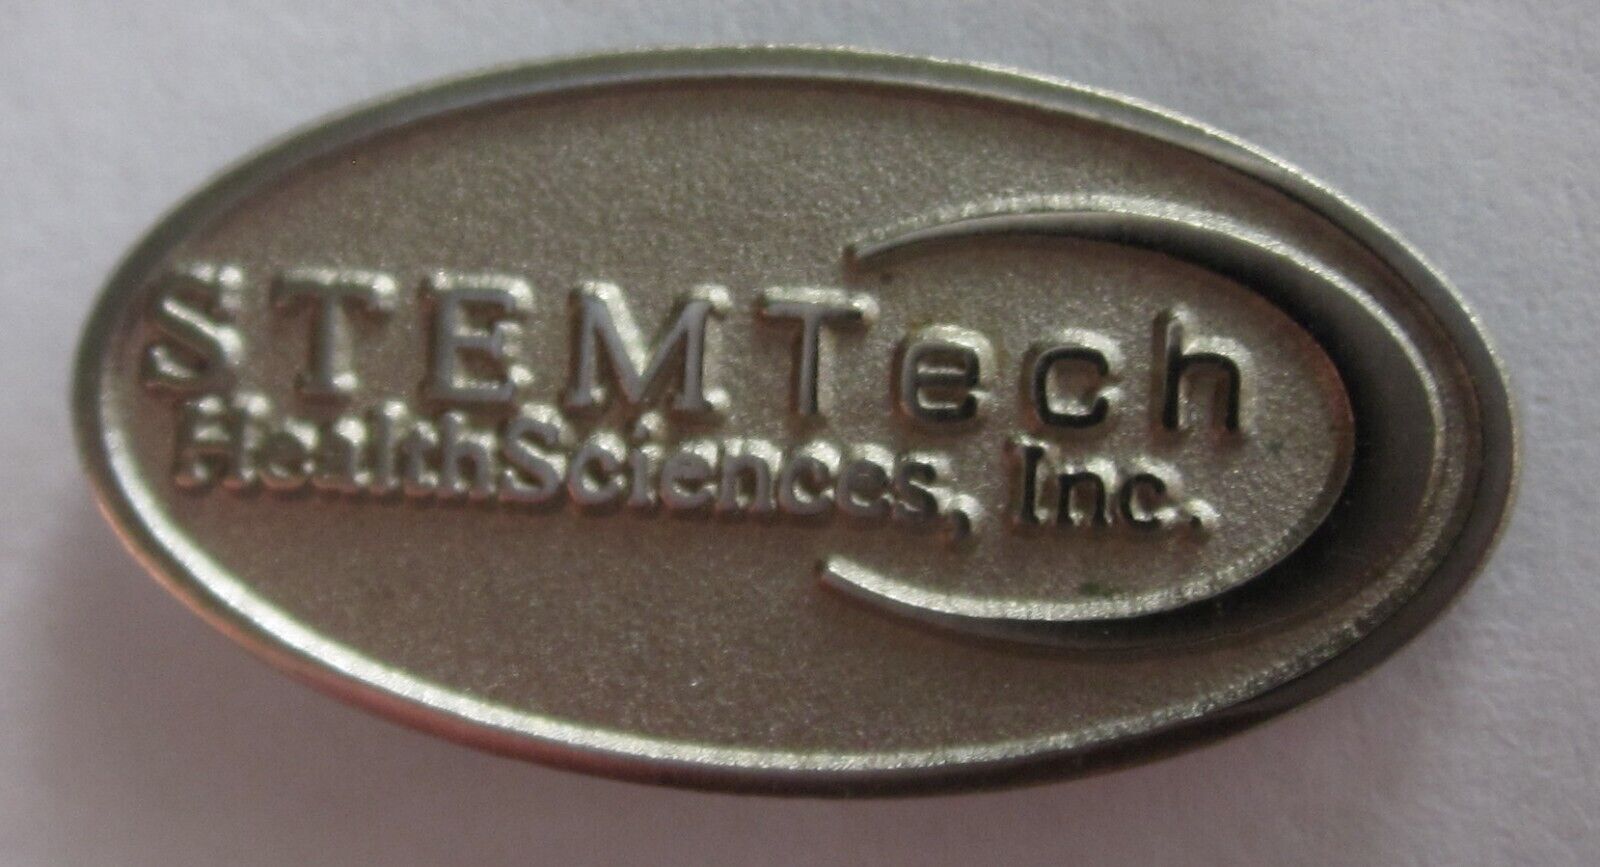 STEMTECH  HEALTH & SCIENCES. INC.  PIONEER IN STEM CELL SCIENCE RARE PIN